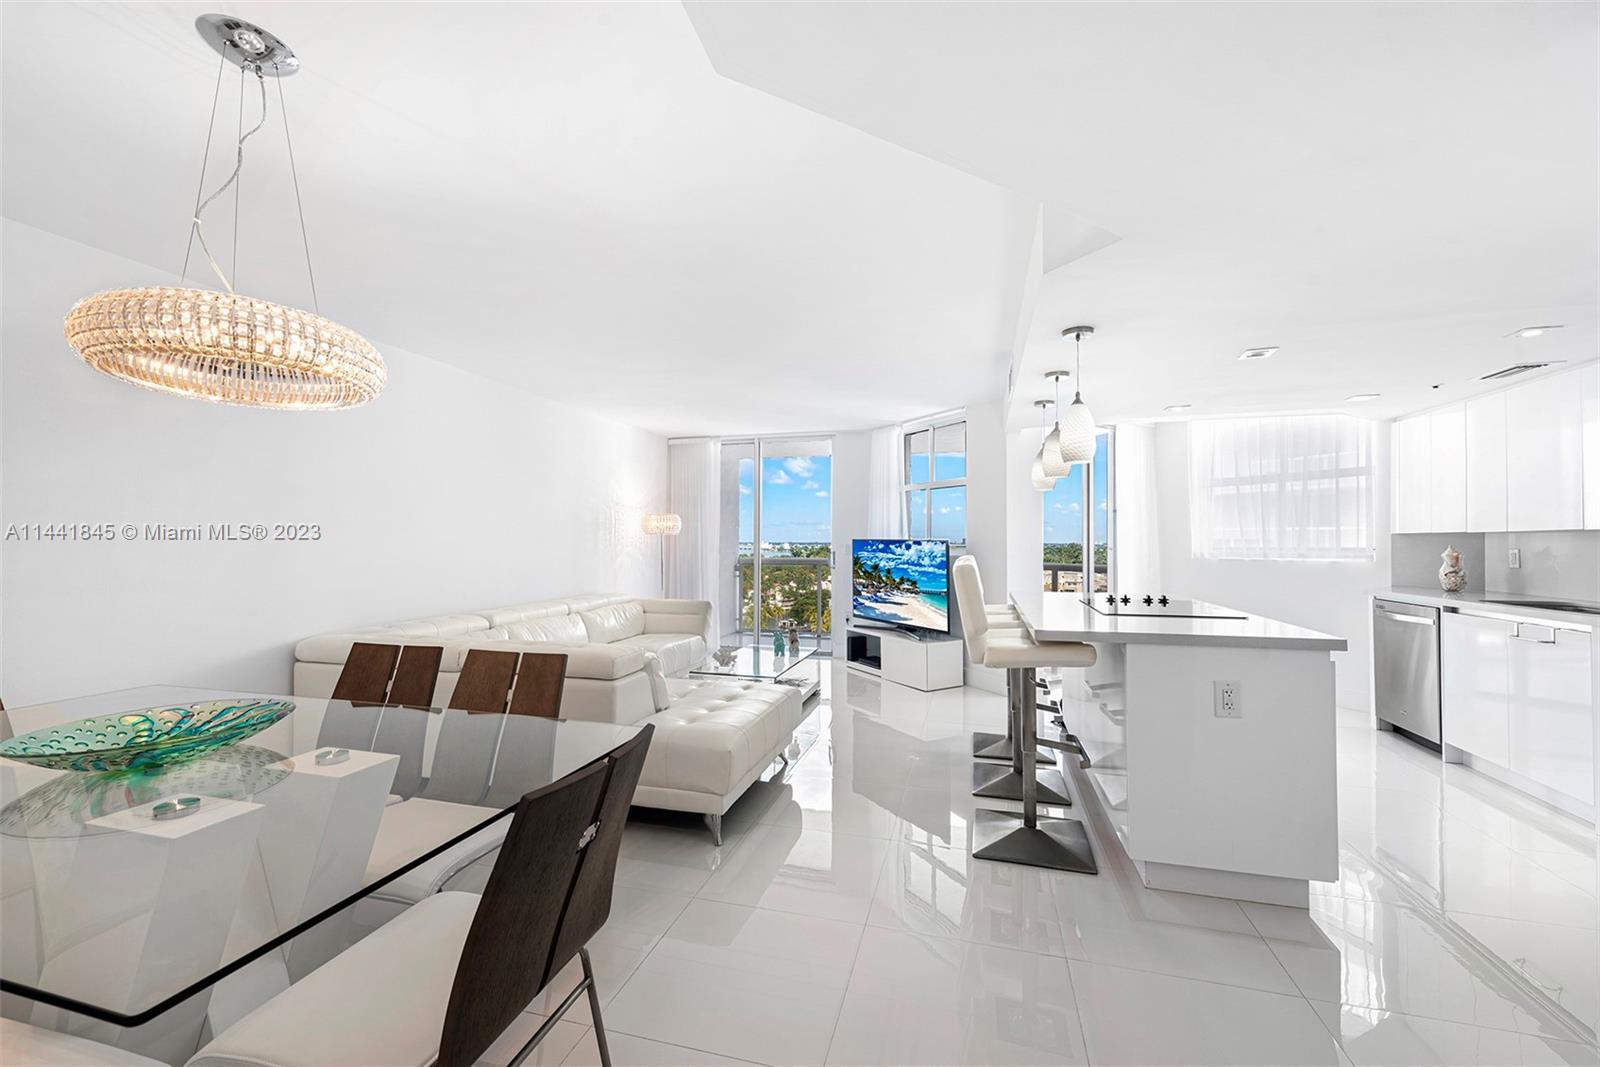 Introducing the perfect Miami Beach condo! This stunning 2-bedroom, 2-bath residence has undergone a